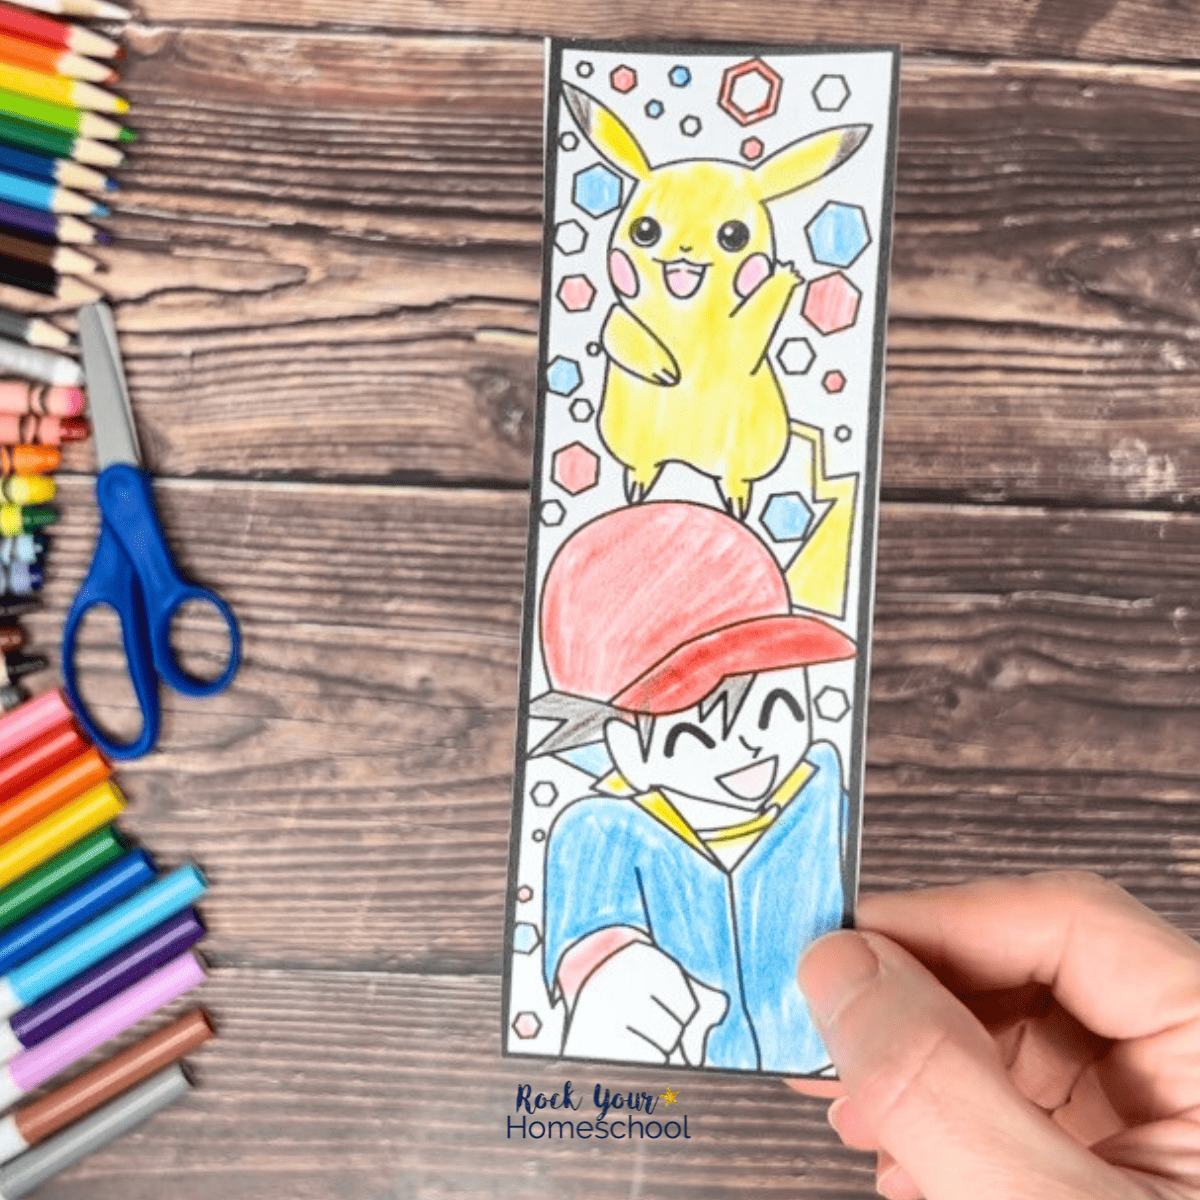 Woman holding Pikachu and Ash bookmarks as example of this free set of printable coloring bookmarks.